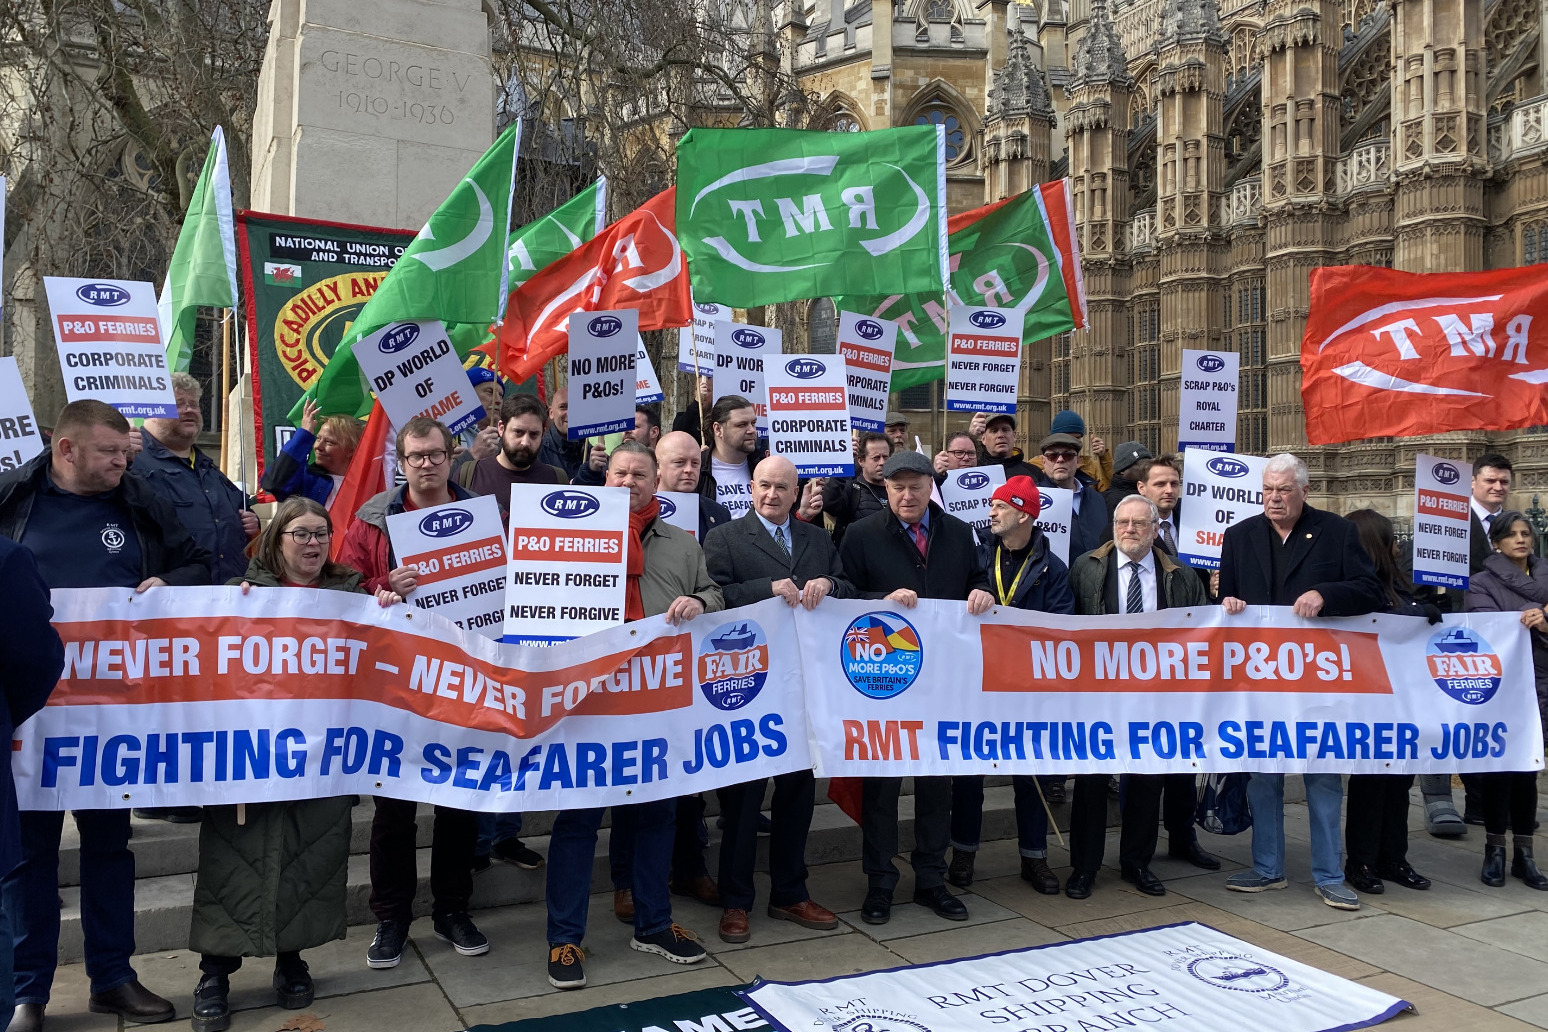 Union condemns Government amid P&O sackings anniversary protest 